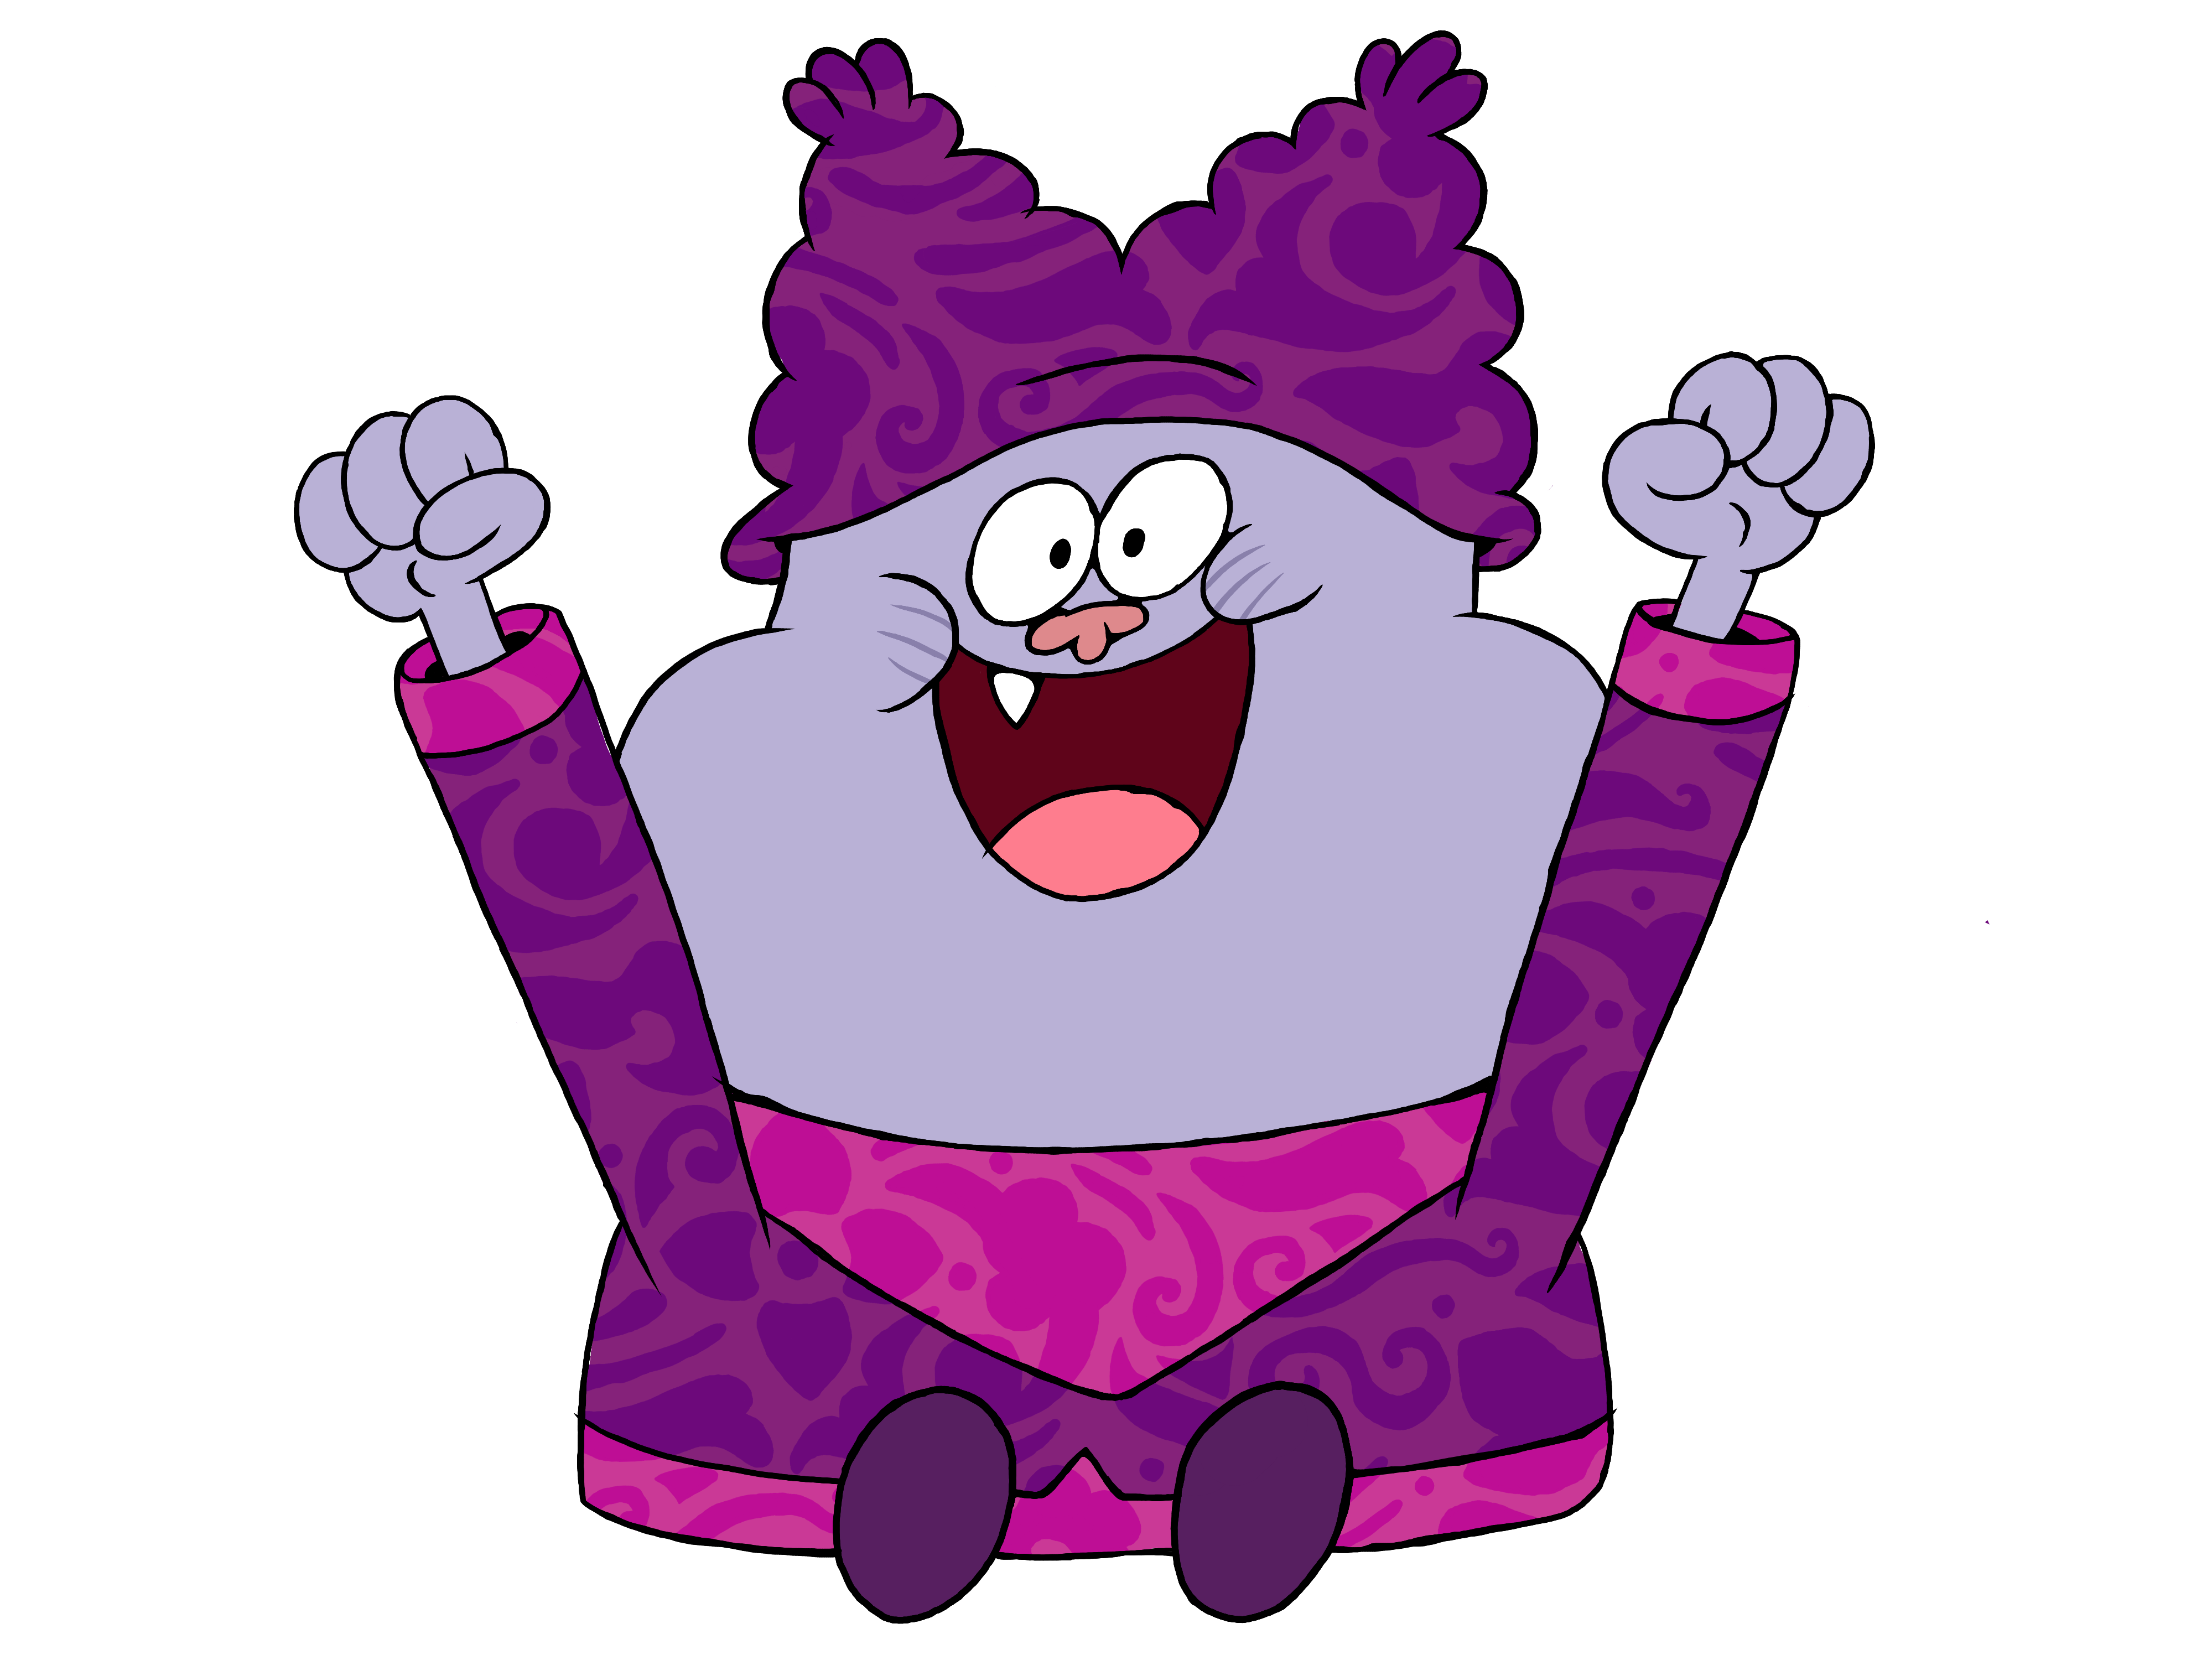 Chowder PNG by seanscreations1 on DeviantArt